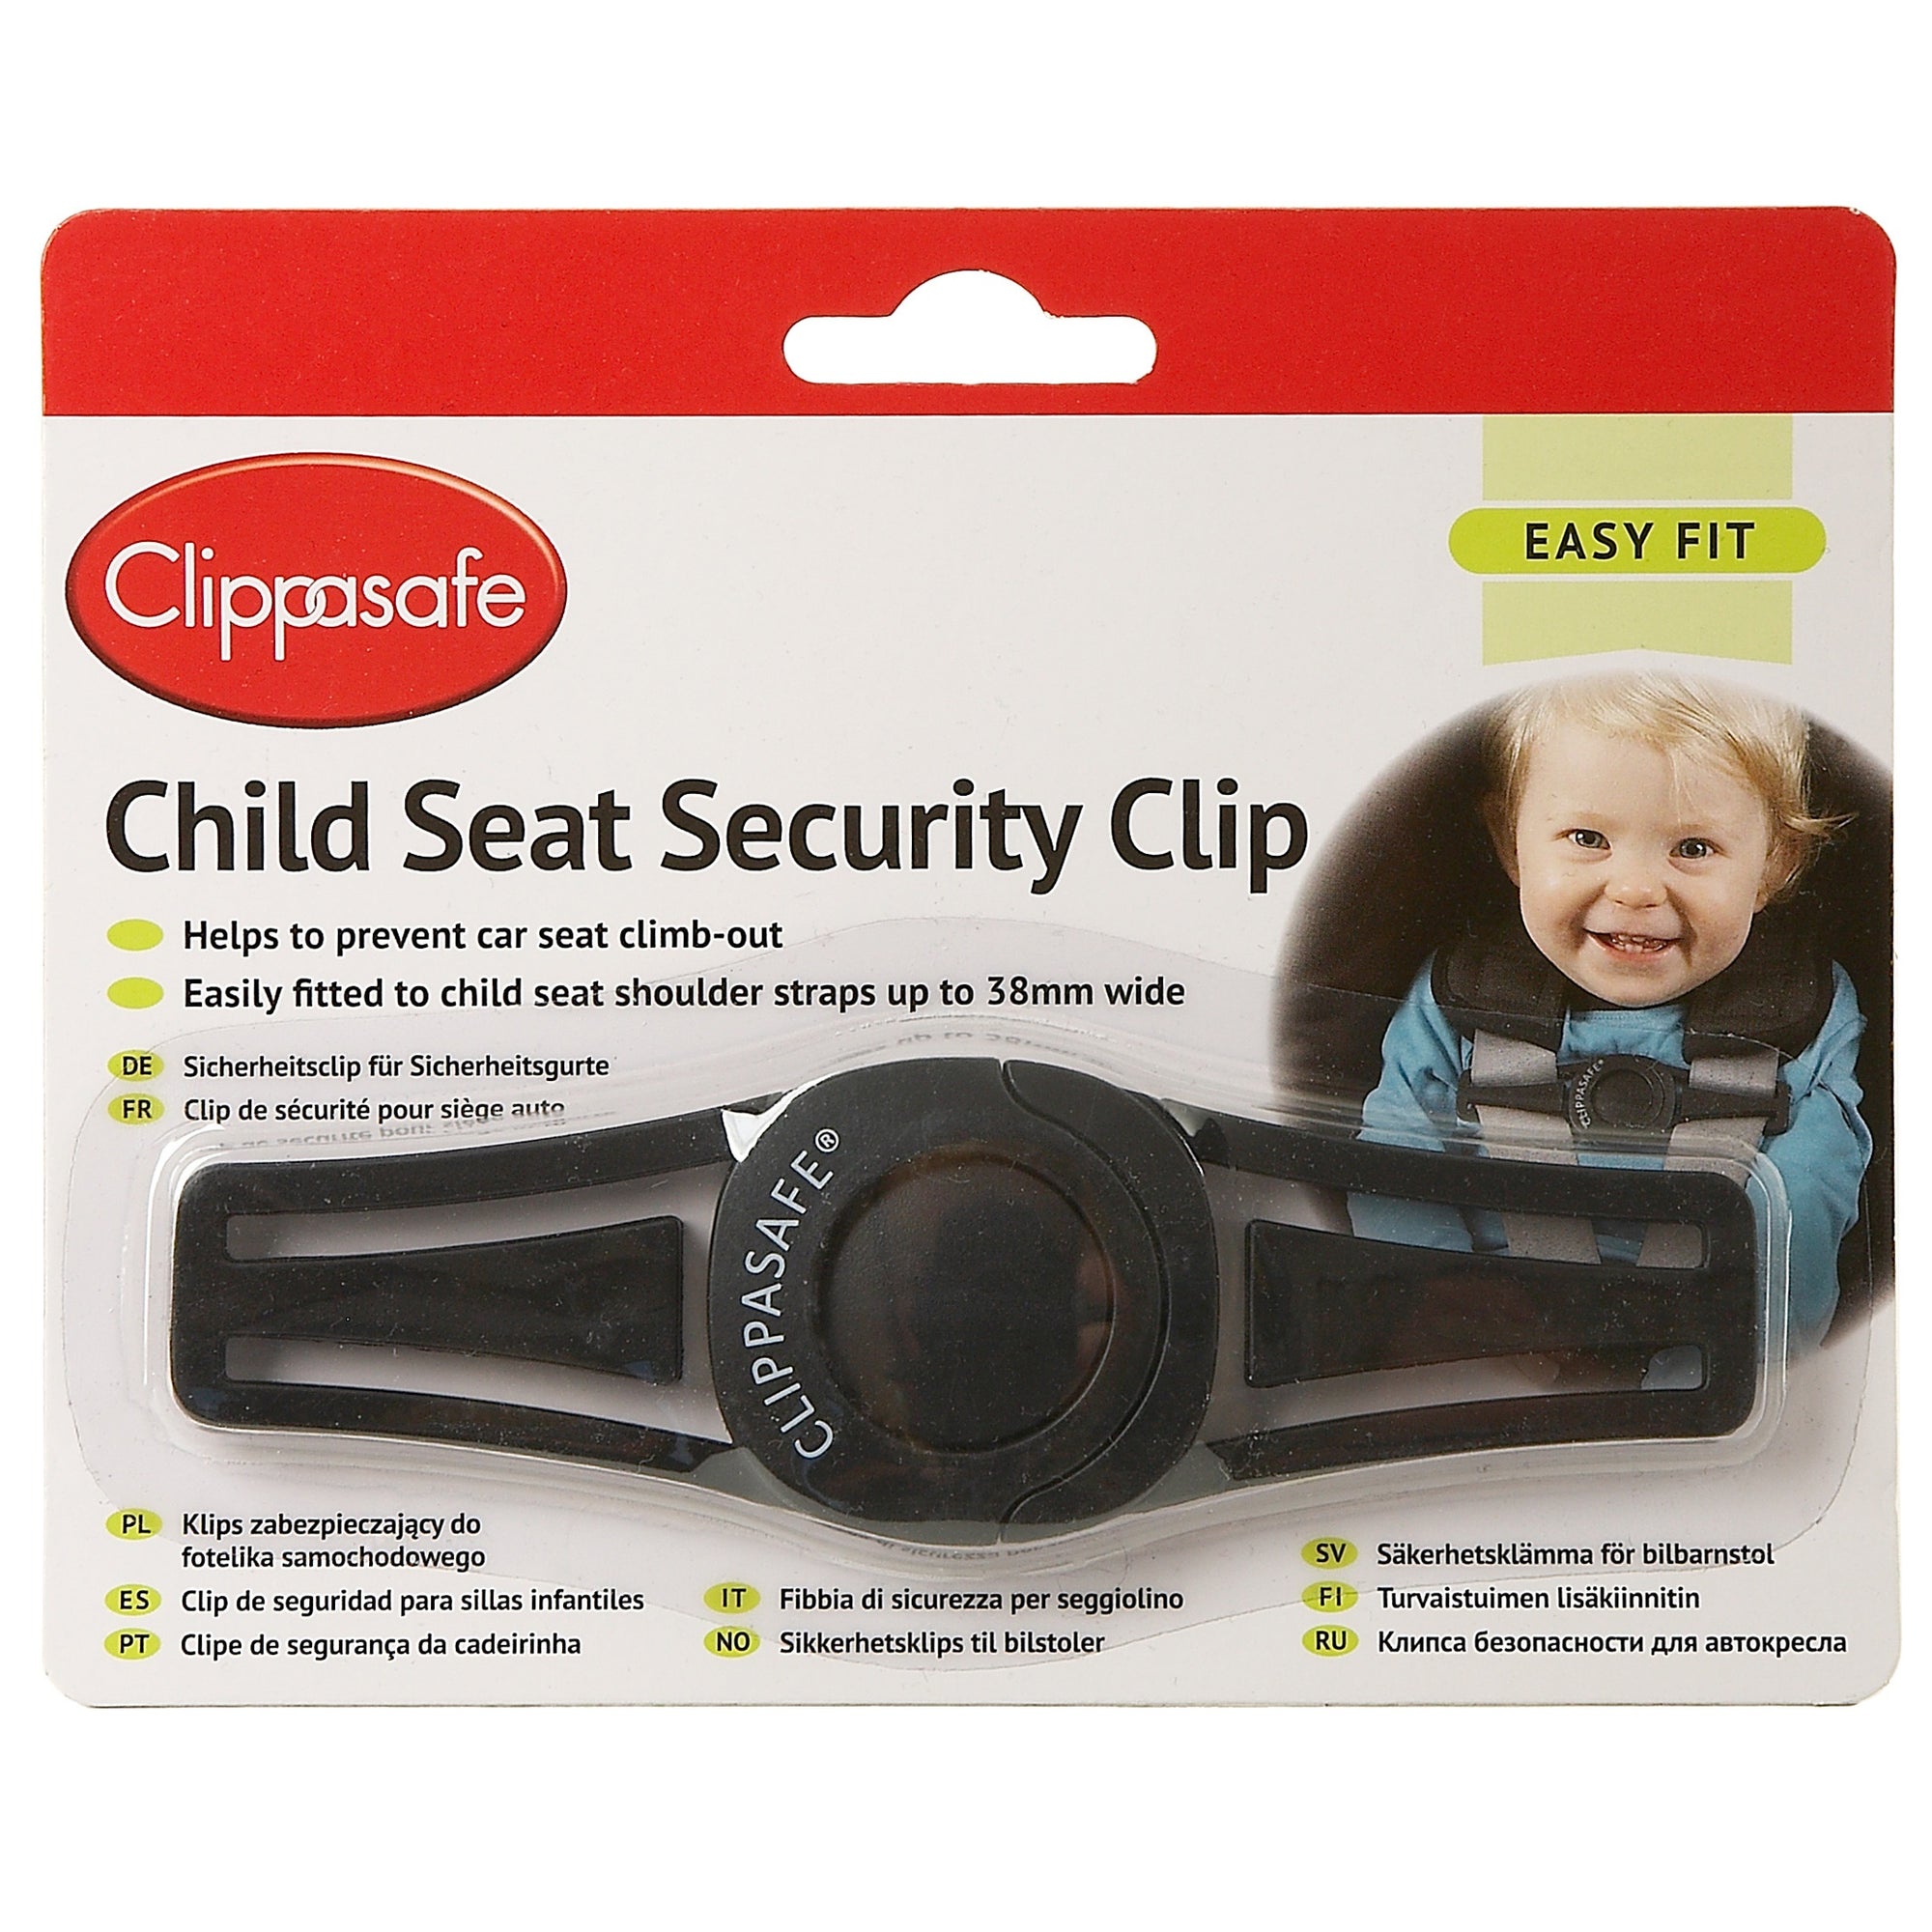 Clippasafe 64 Child Seat Security Clip